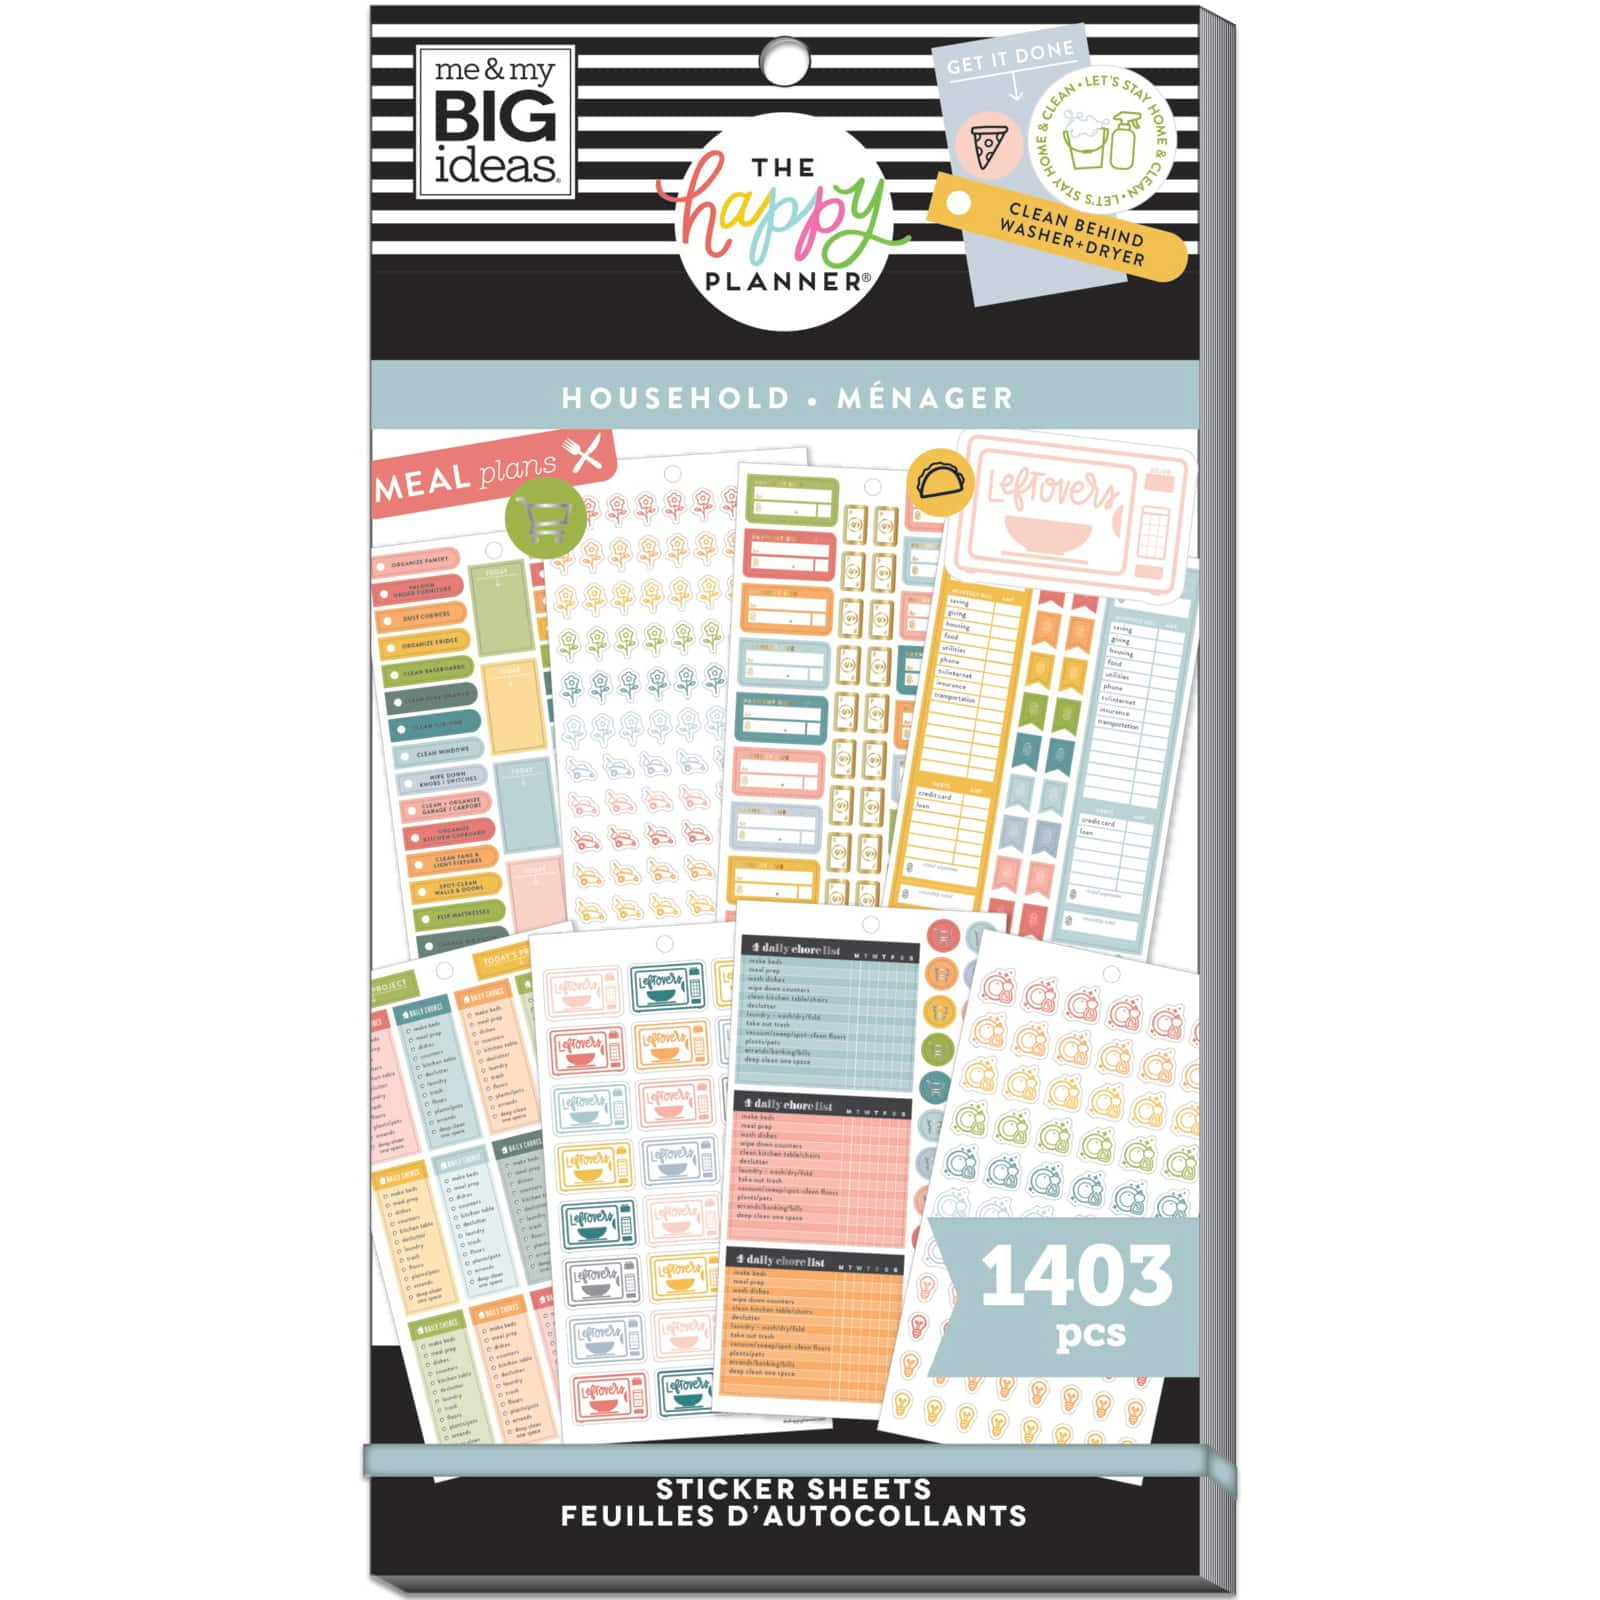 Housework & Chores Icon Stamps, Planner Stamps